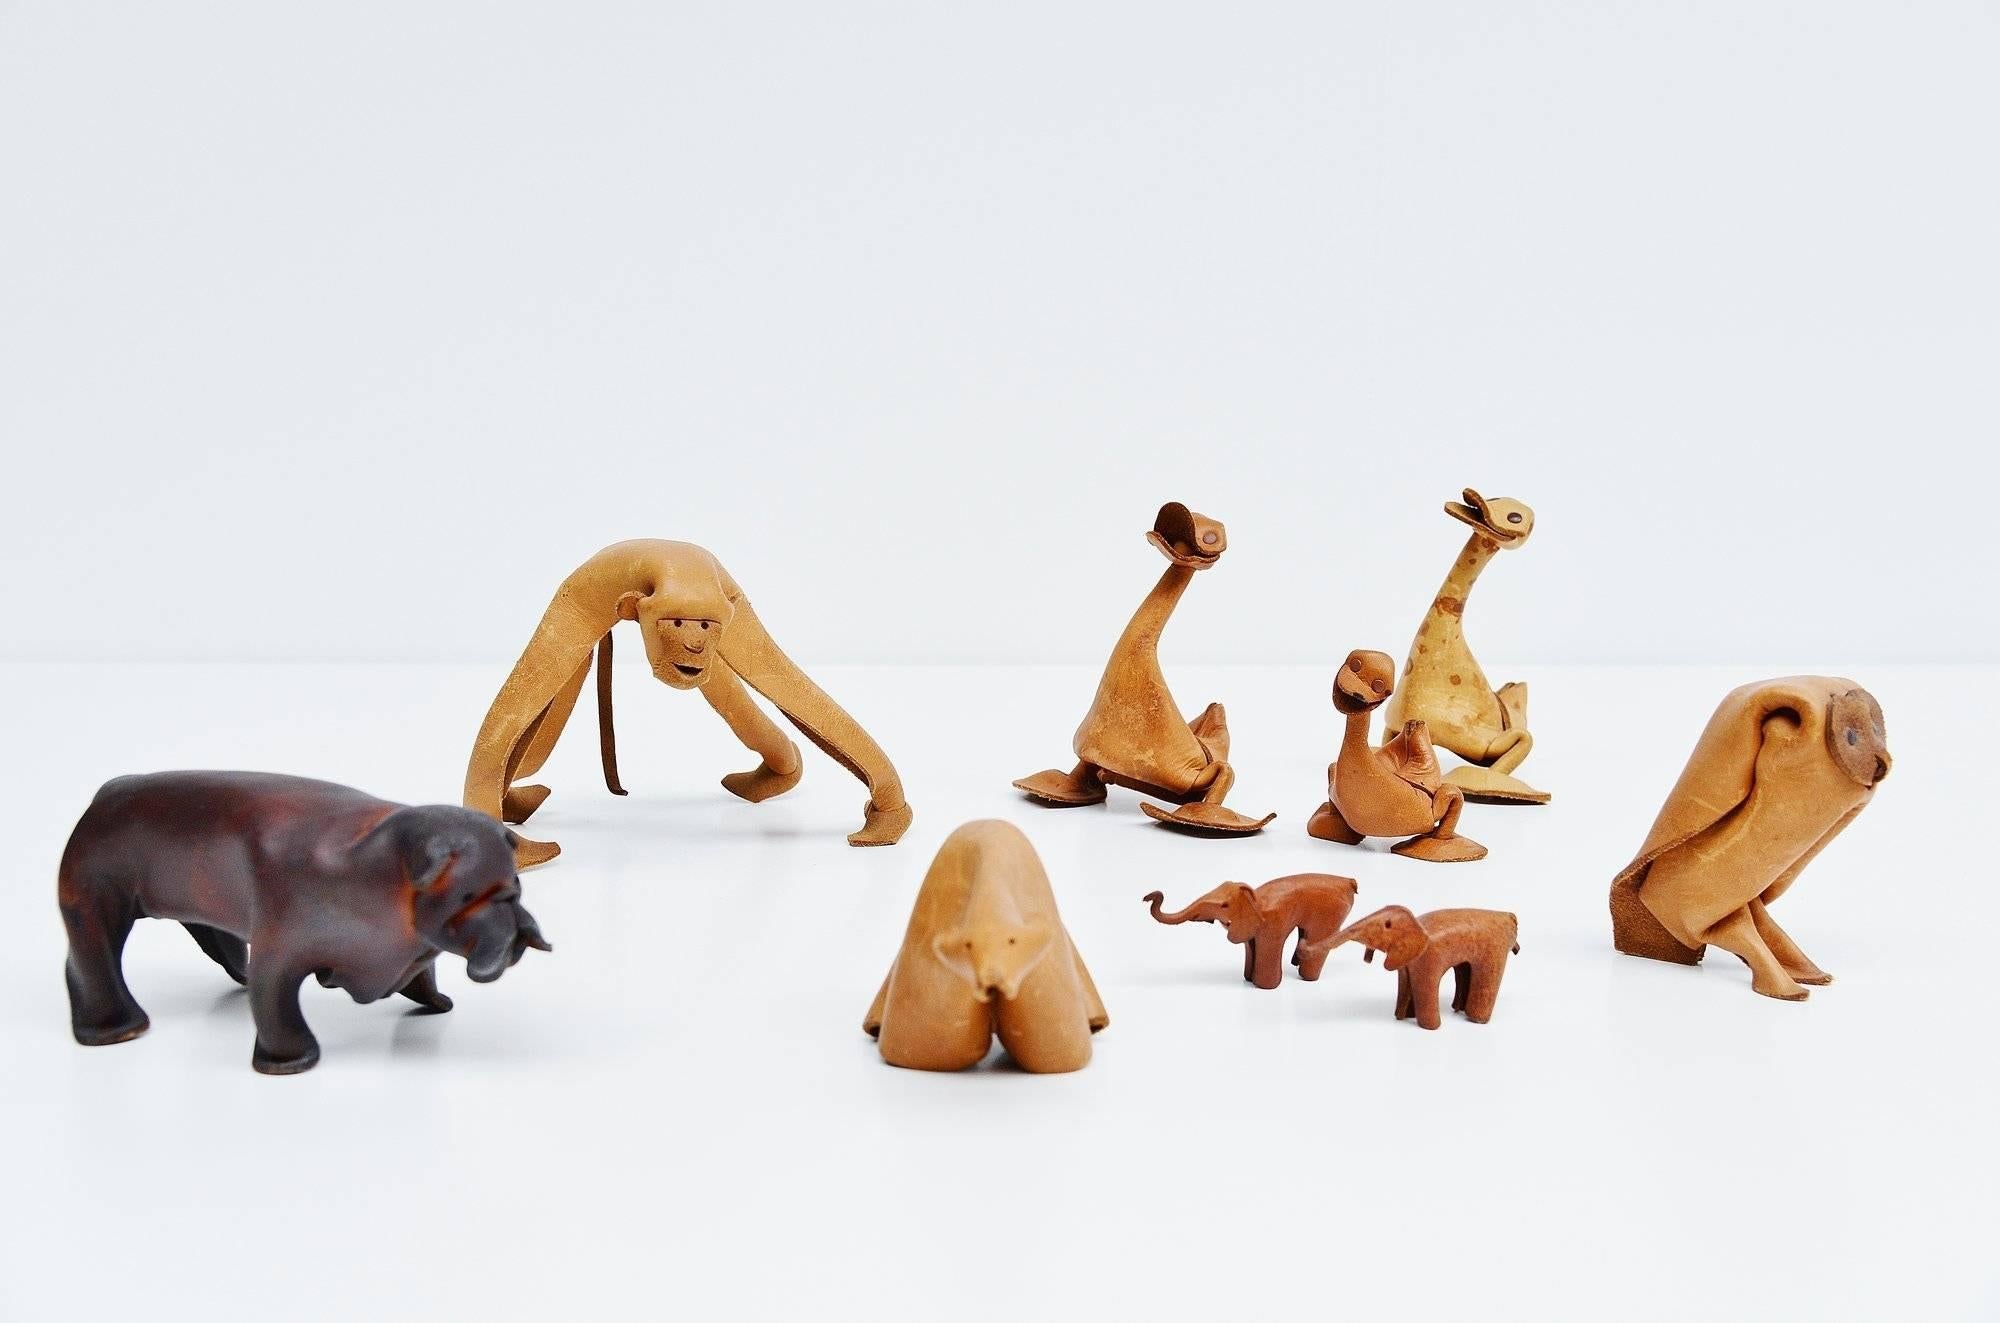 This is for a set of leather sculpted animals made by German company Deru in the 1960s. This set includes a monkey, owl, polar bear, Pitbull, three ducks and two small elephants. Deru made several different leather animals in the 1960s. They are